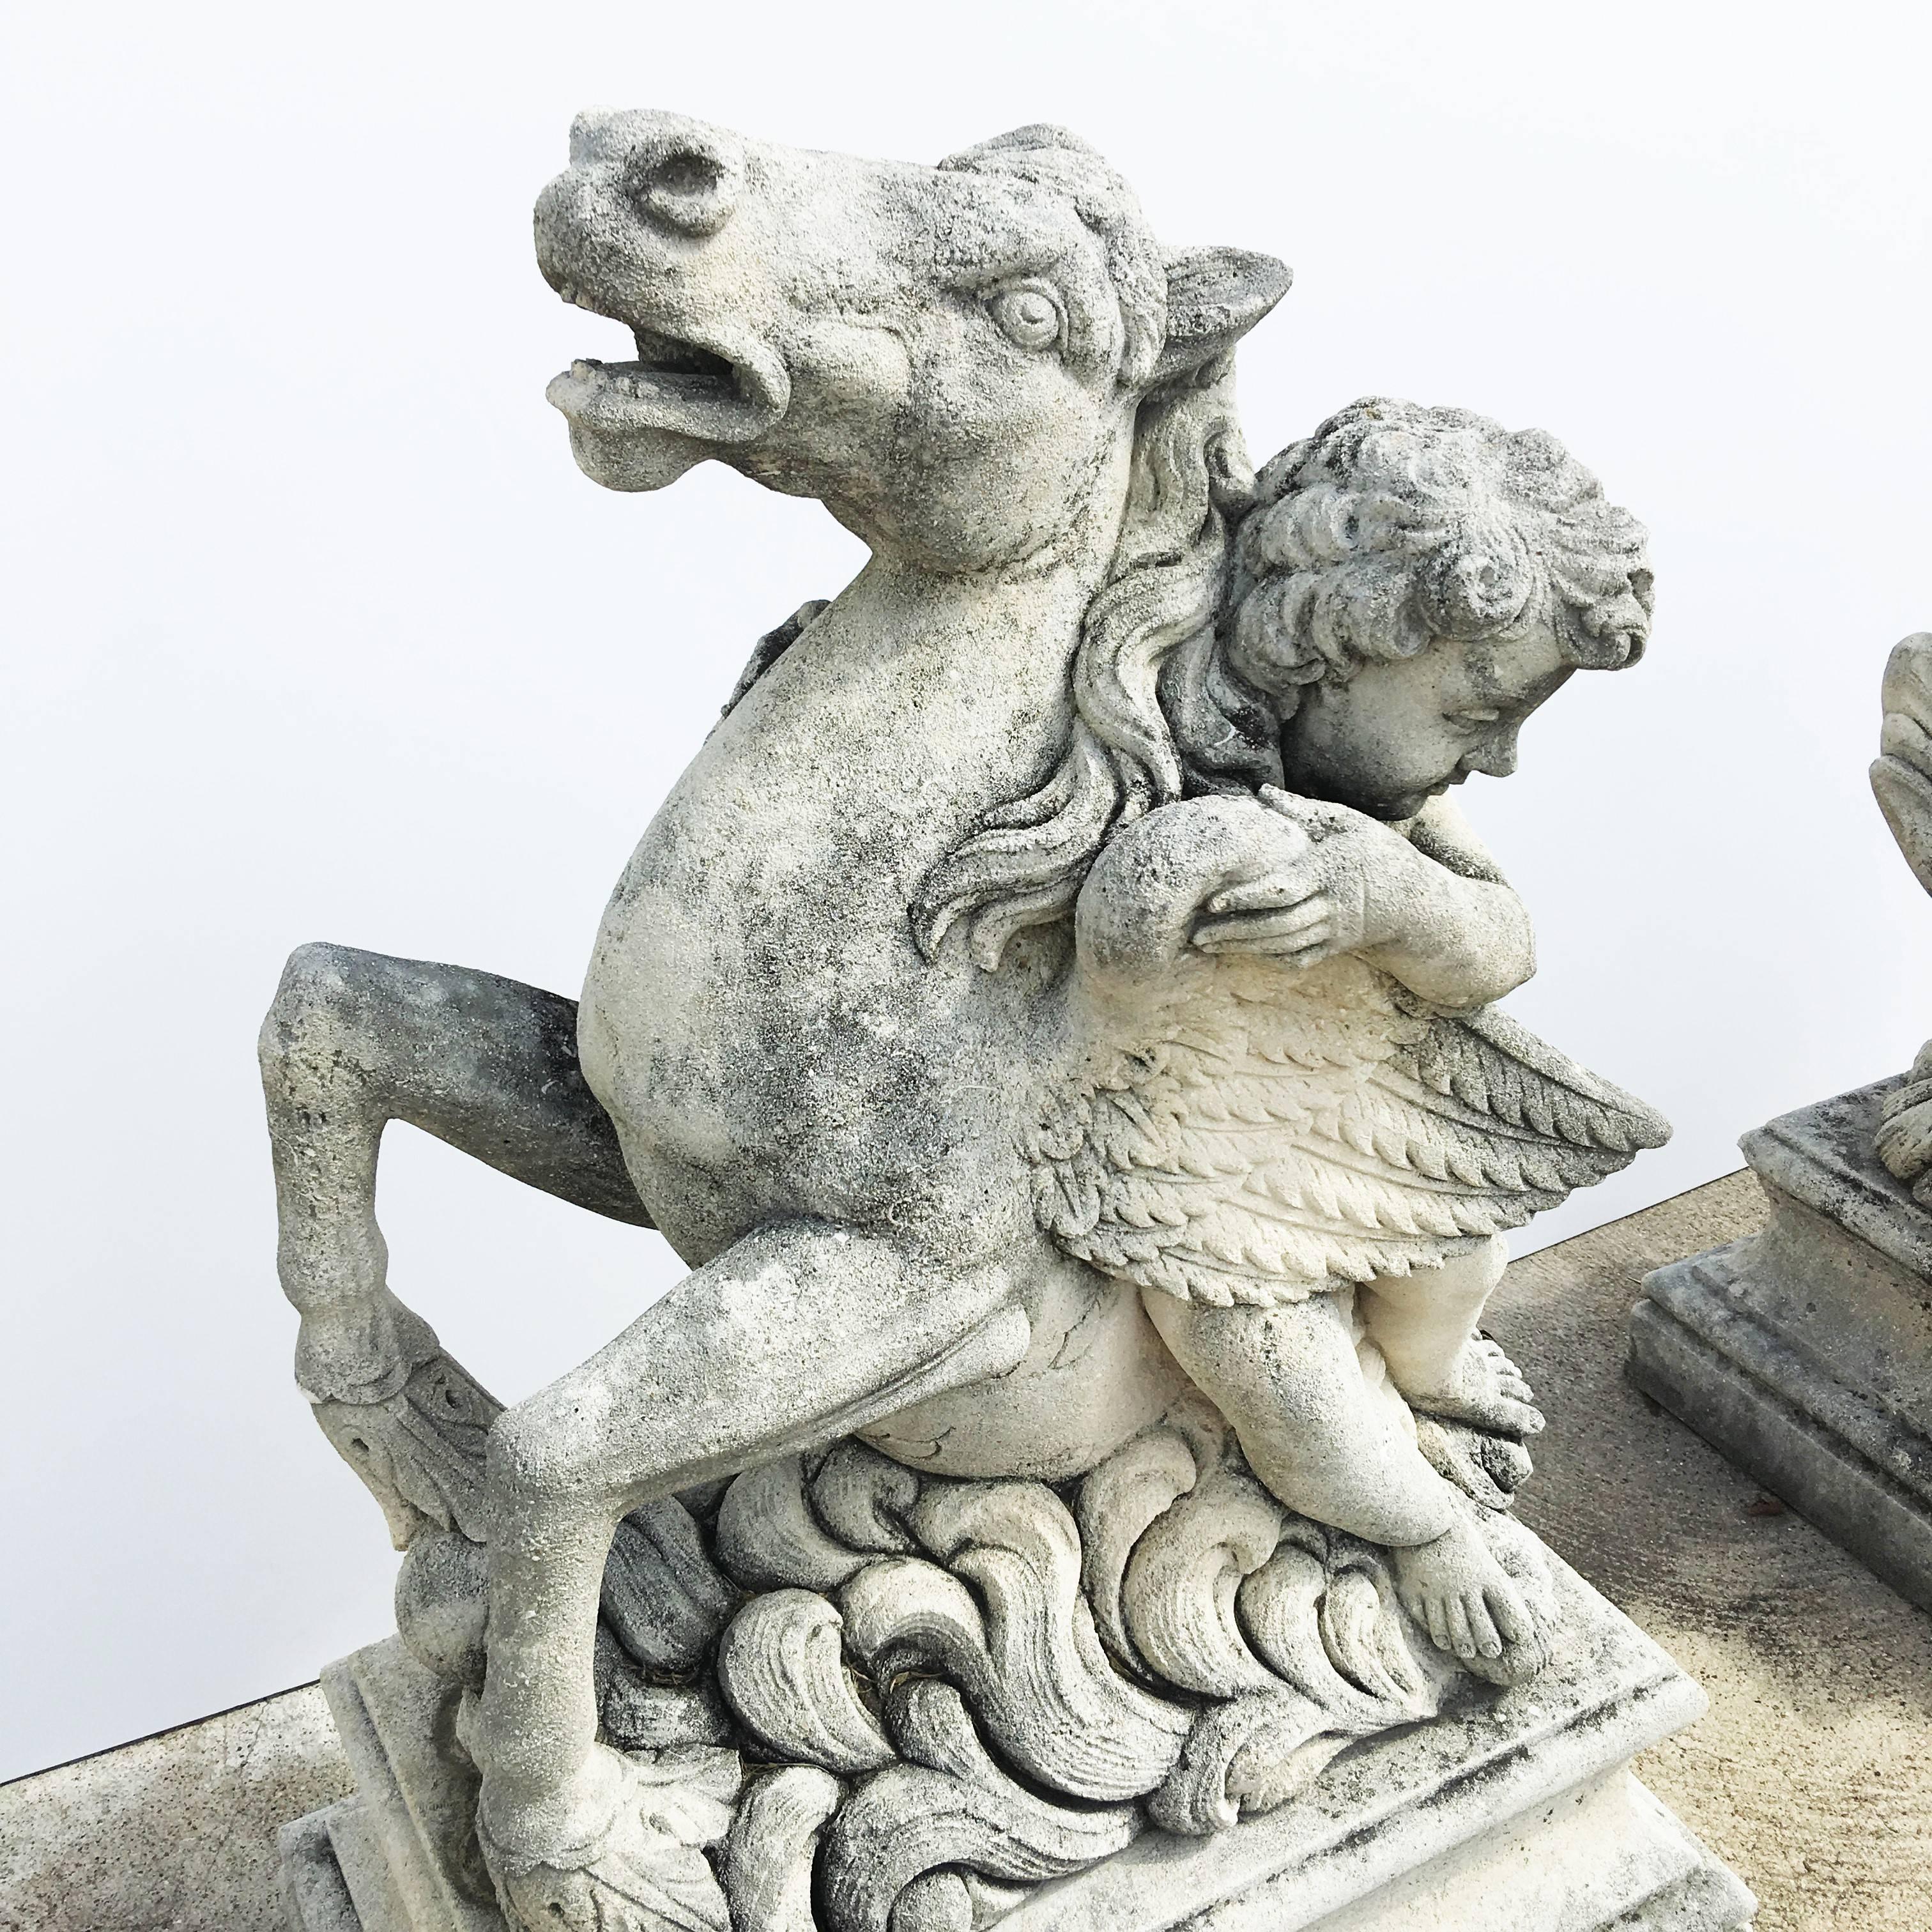 Inspired by the fountain of Neptune, carved stone statue from Italy. This piece has been drilled and has a spout and was used at one time as a fountain. The statue is a cherub riding a sea horse (hippocampus is a mythological creature shared by